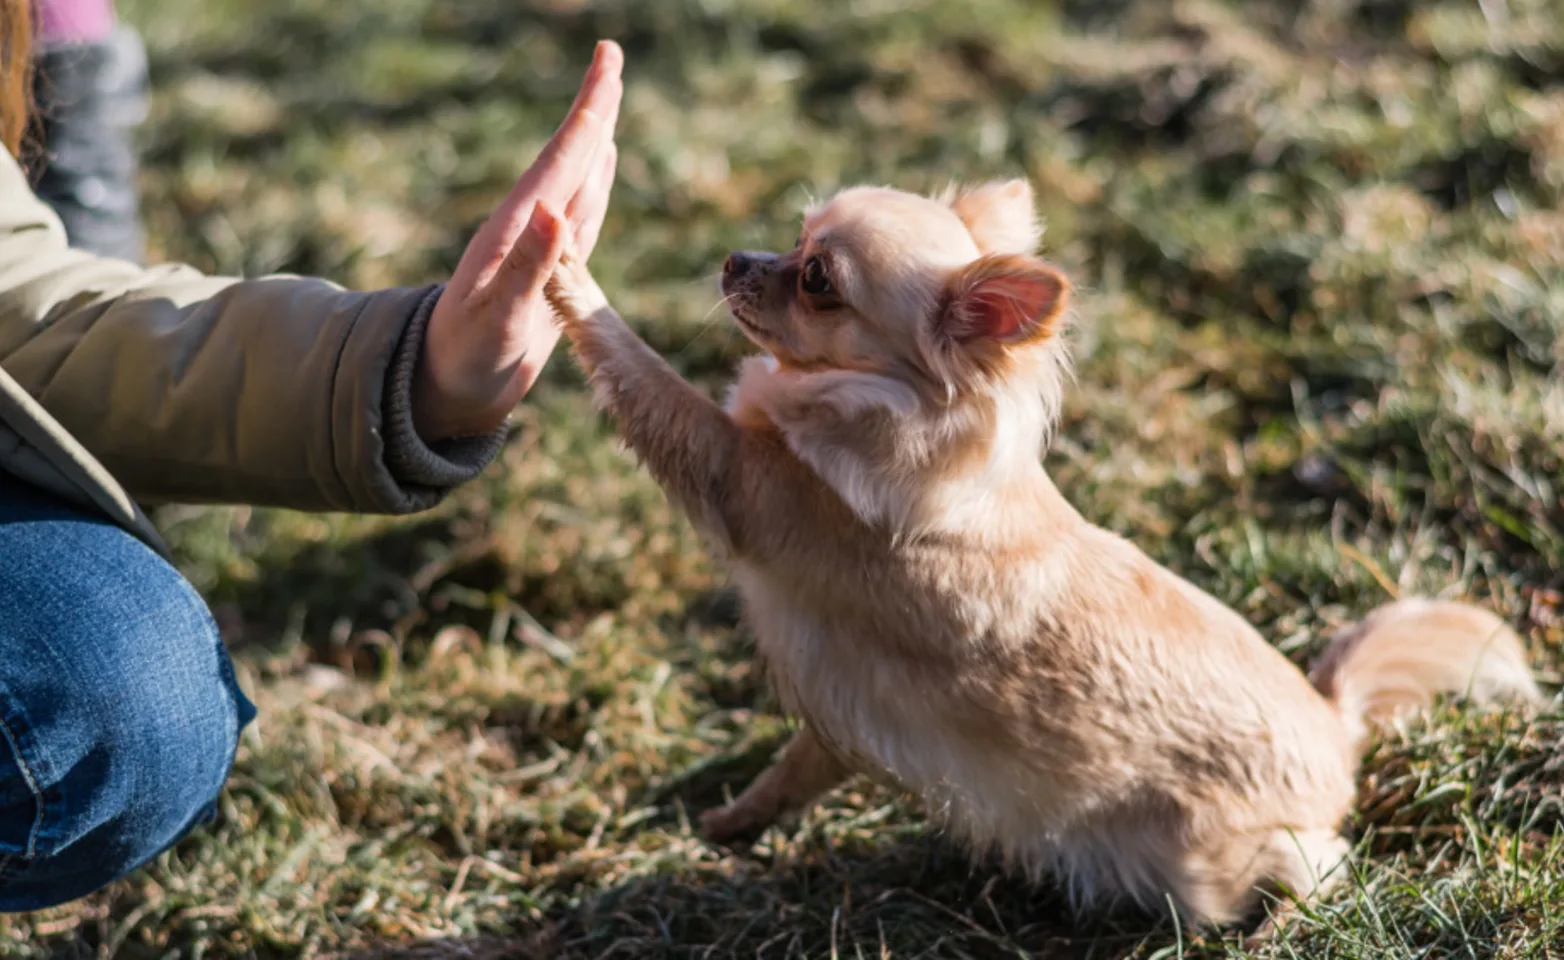 Owner Giving a Small Dog a High-Five